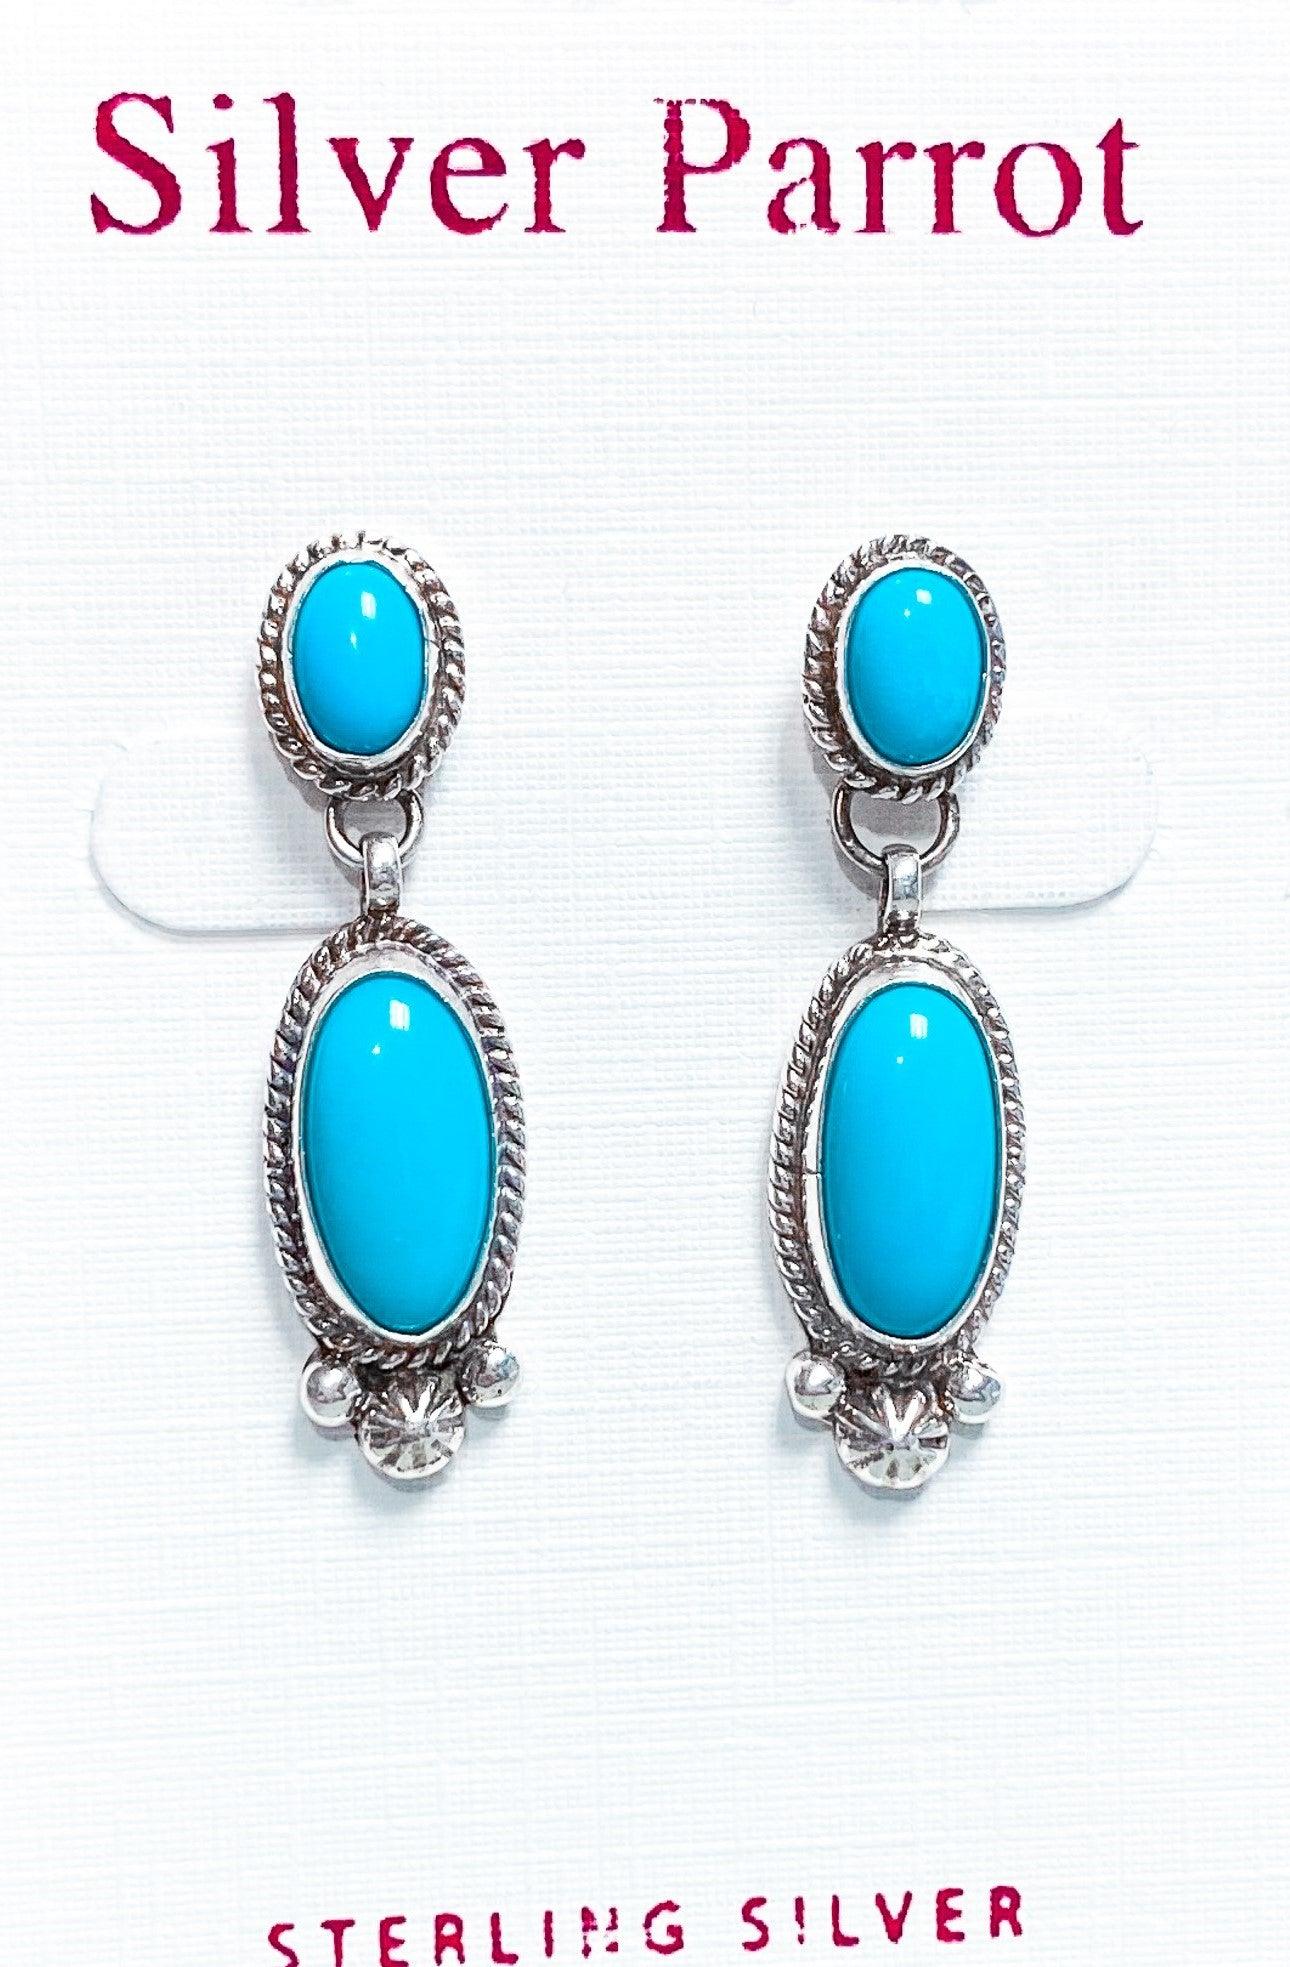 Navajo Sterling Earrings With Turquoise - Silver Parrot, Inc. 